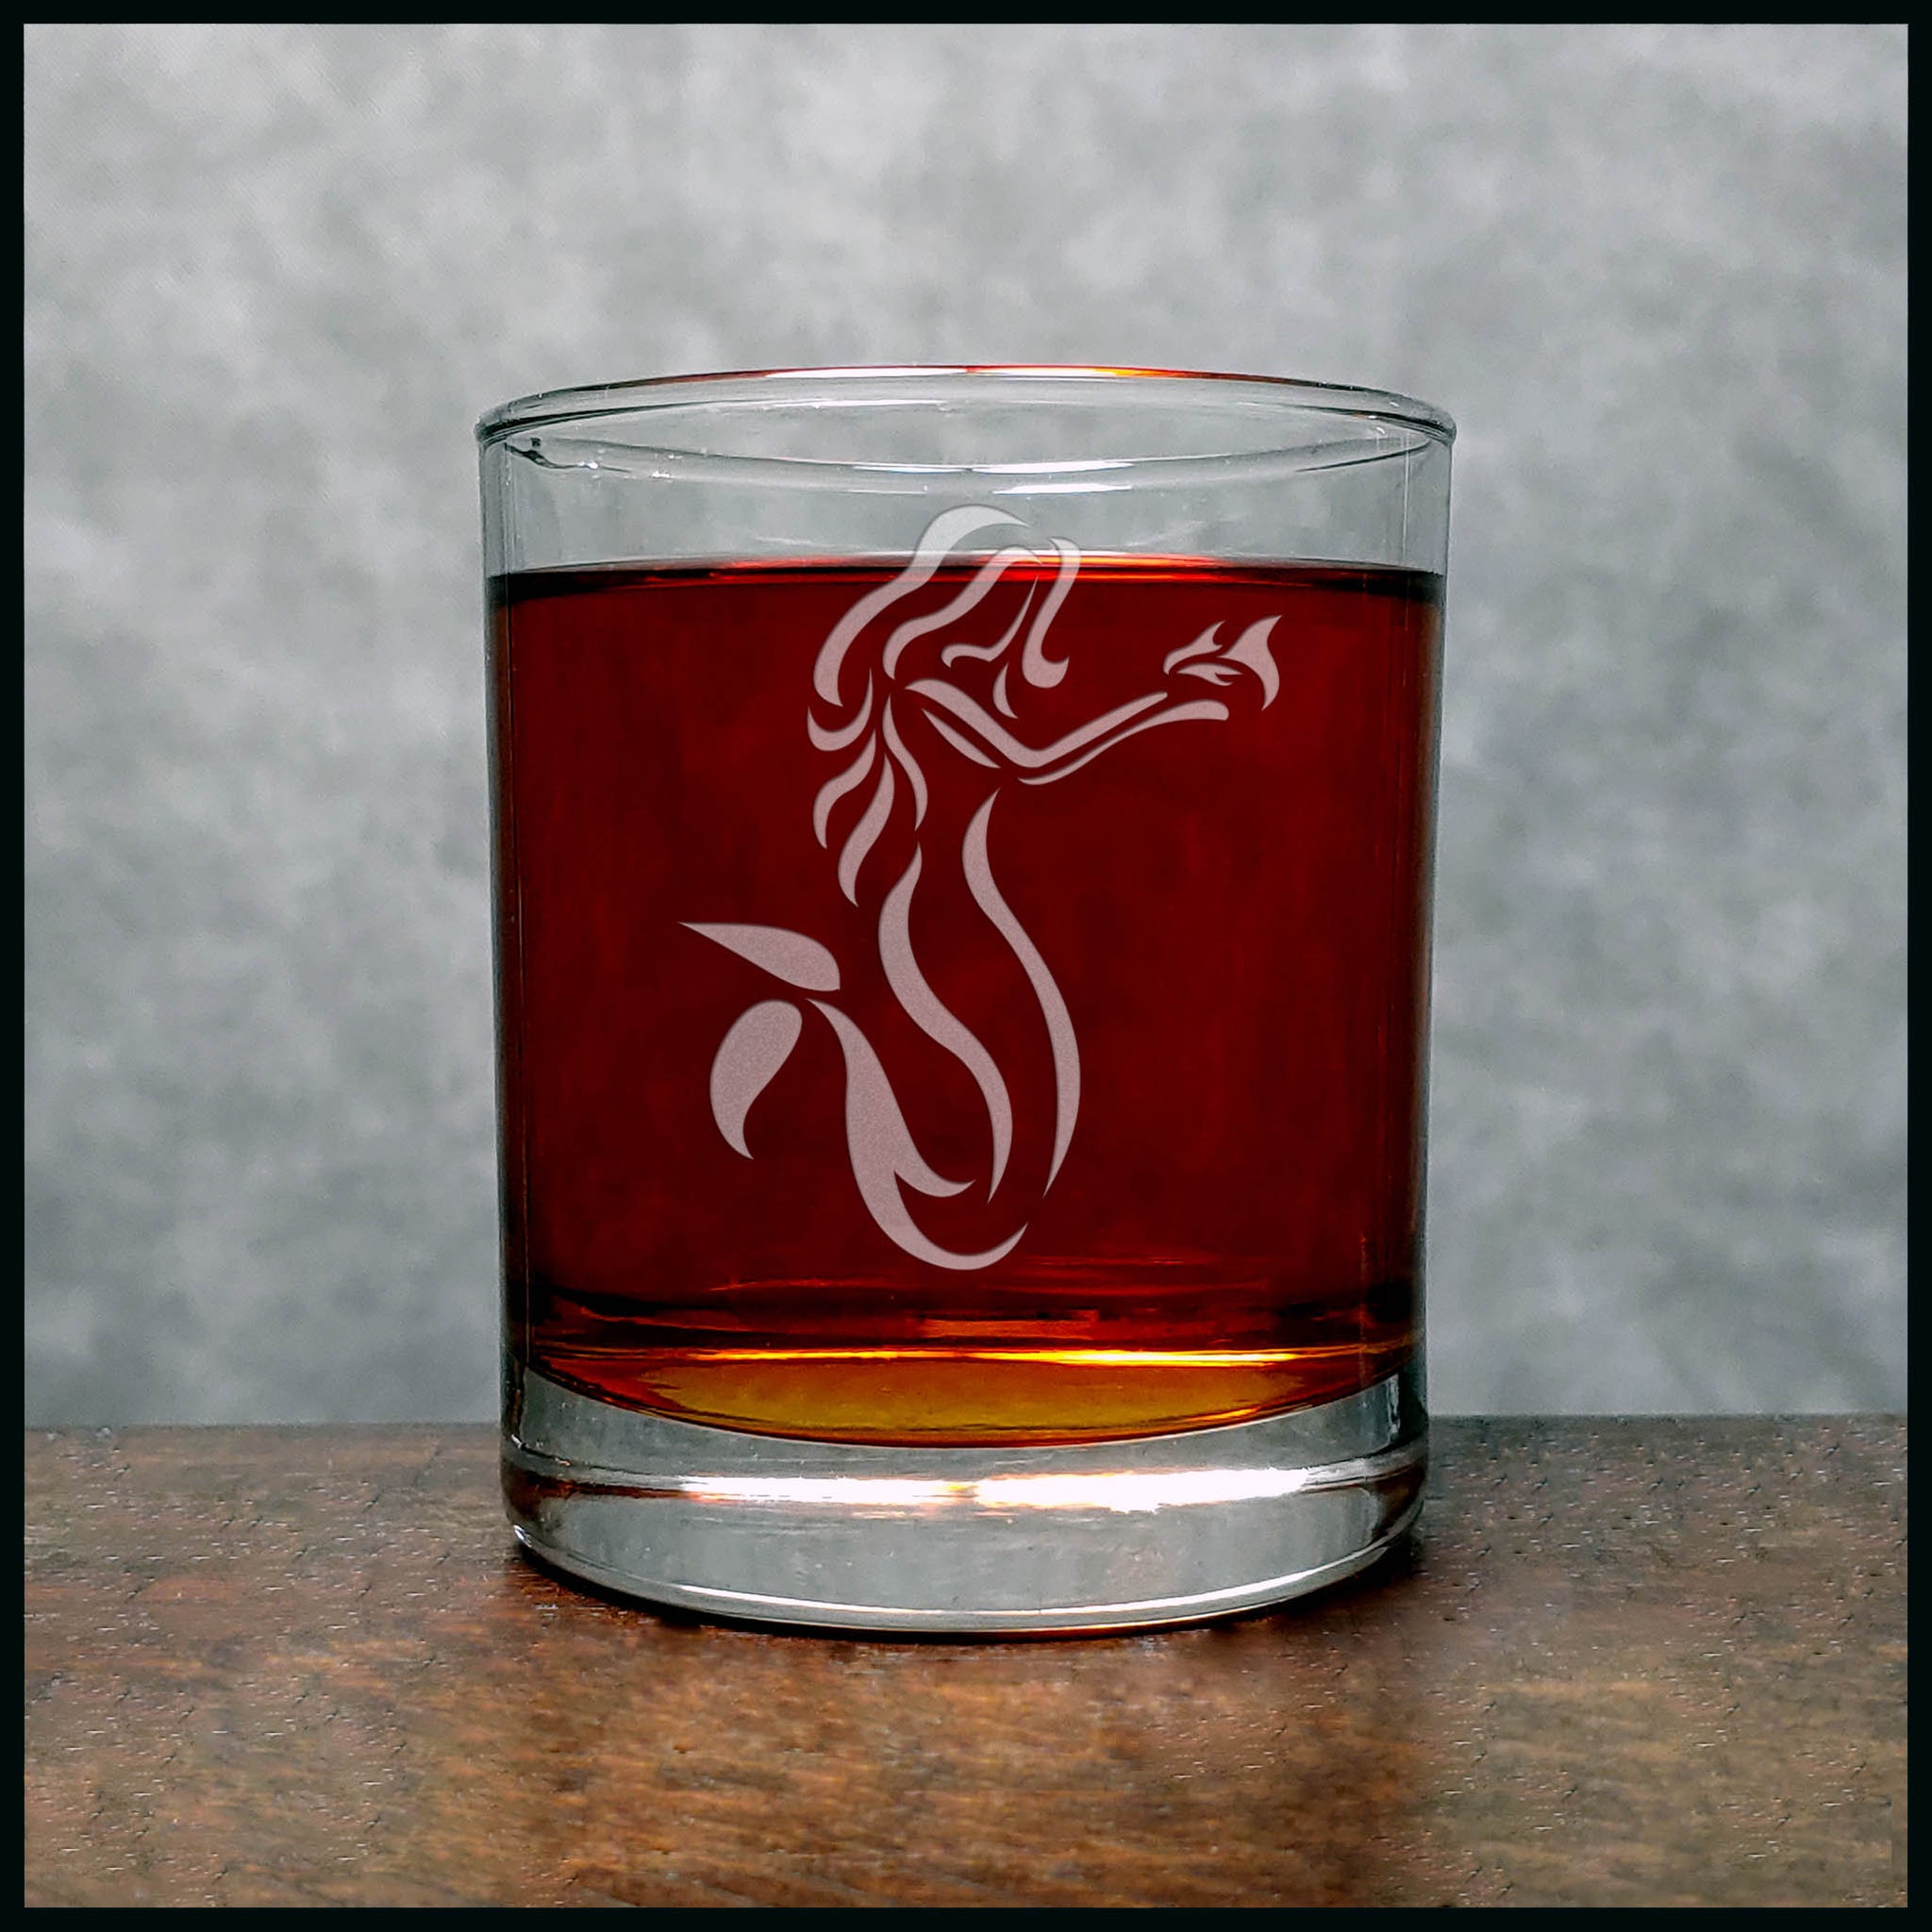 Mermaid Whisky Glass - Design 3 - Copyright Hues in Glass